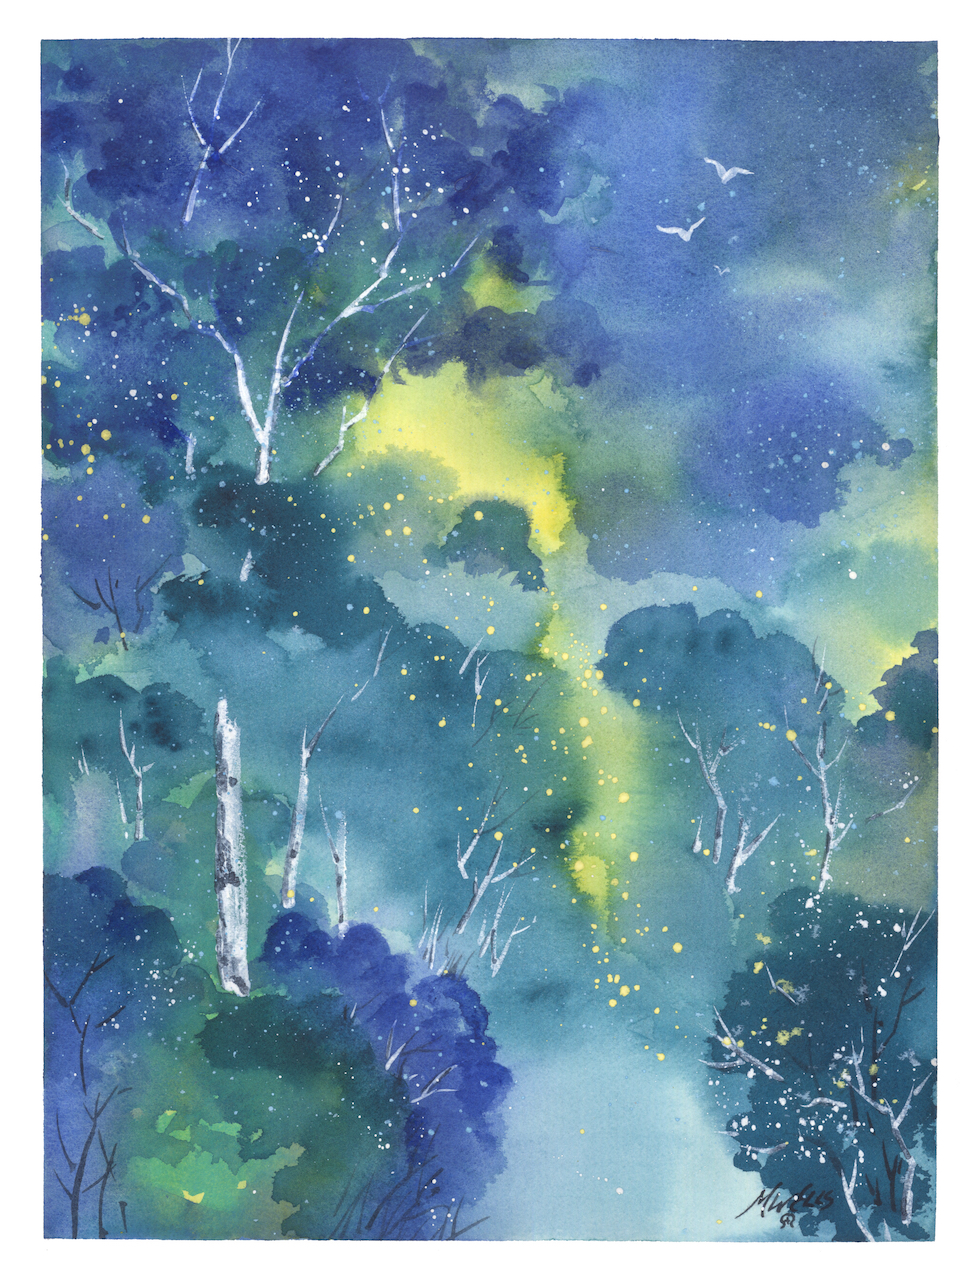 watercolor in blues with yellow morning light, "Blue Bayou" by Marilyn Wells